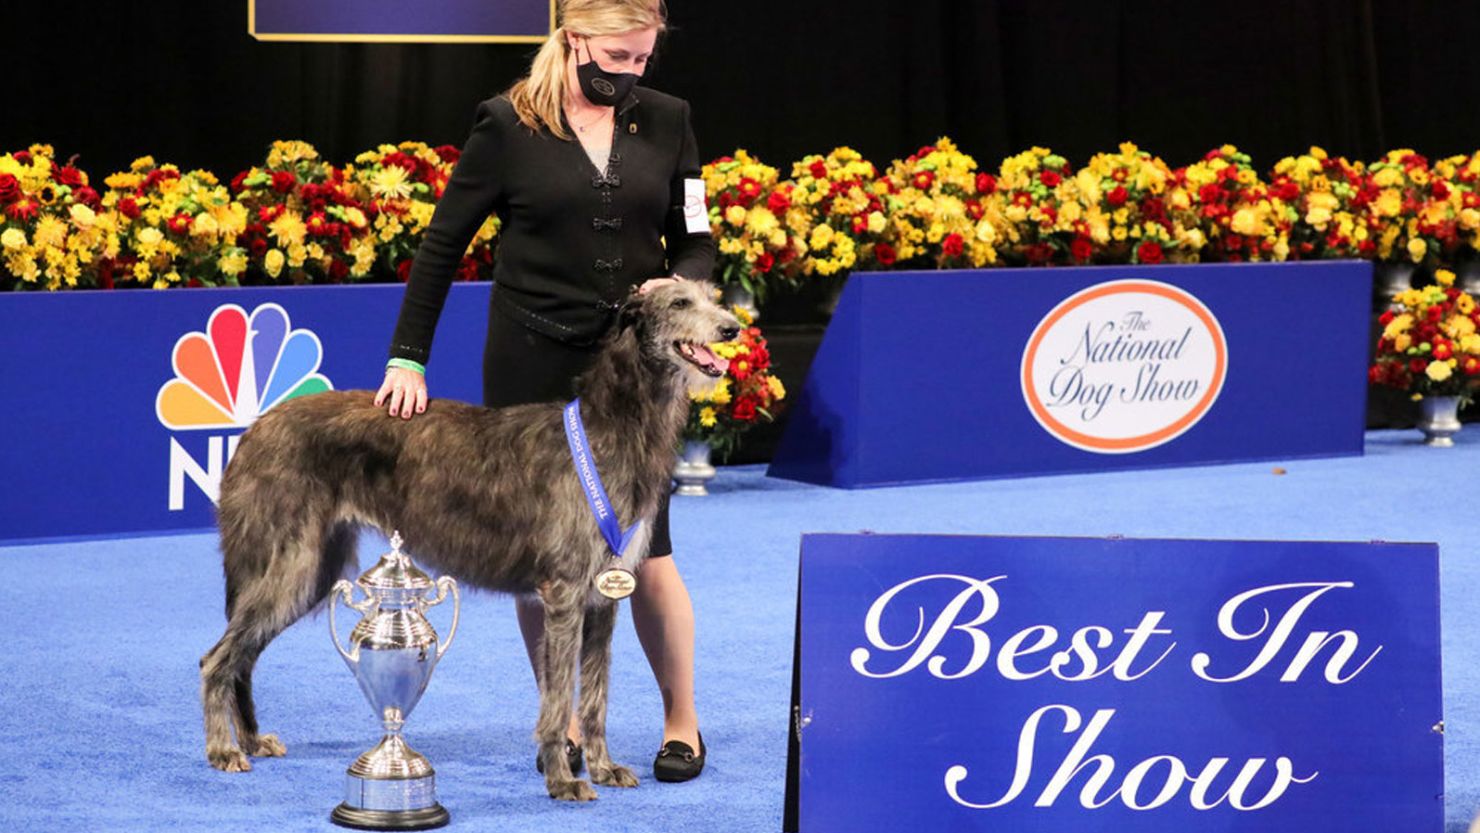 At the 2020 National Dog Show, Claire the Scottish Deerhound won Best In Show, with her handler Angela Lloyd.